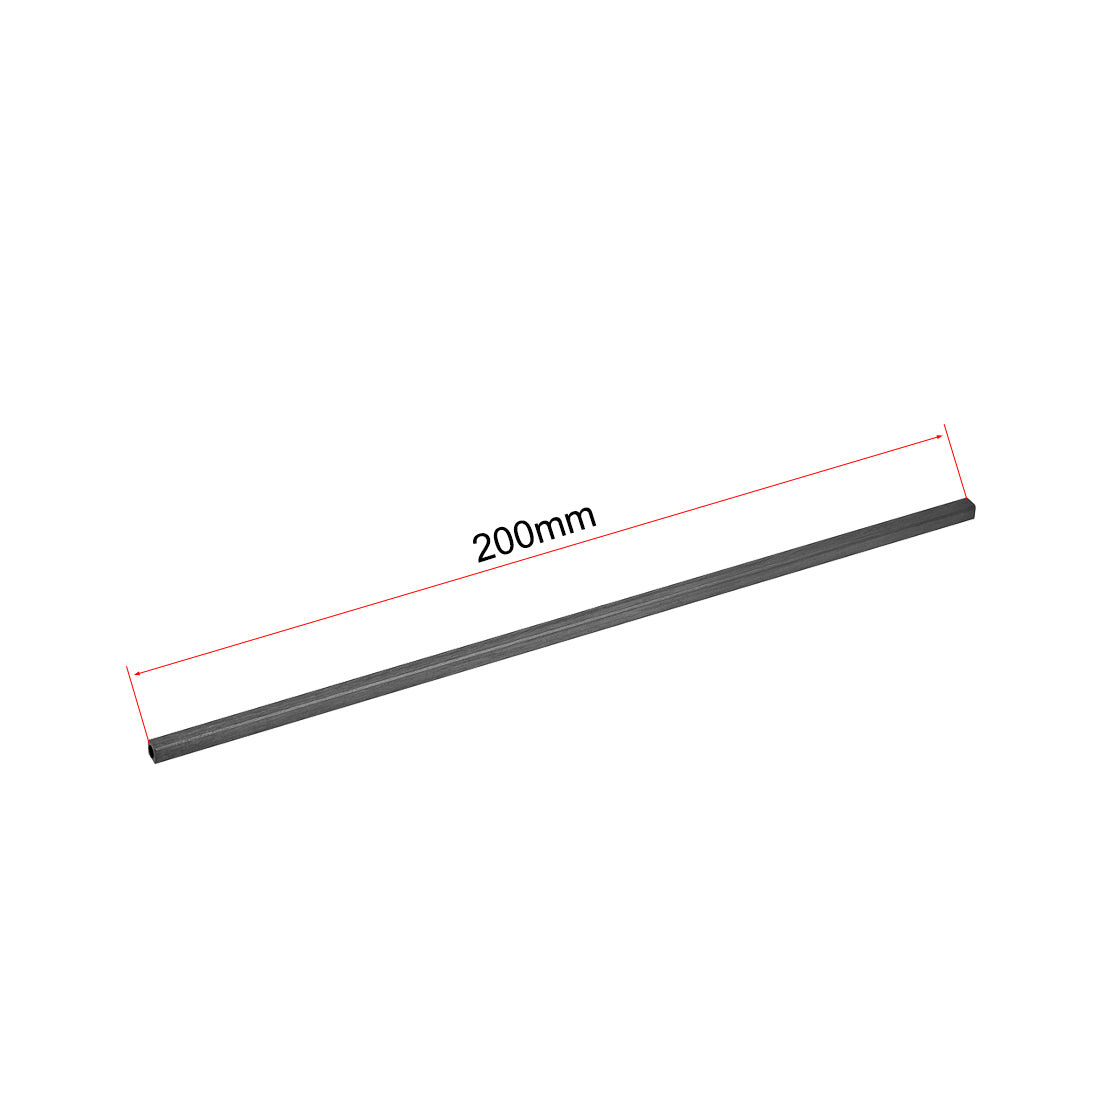 uxcell Uxcell Carbon Fiber Square Tube 4x4x3mm Inner Round Dia. 200mm Length Pultruded Carbon Fiber Tubing for RC Airplane 2 Pcs